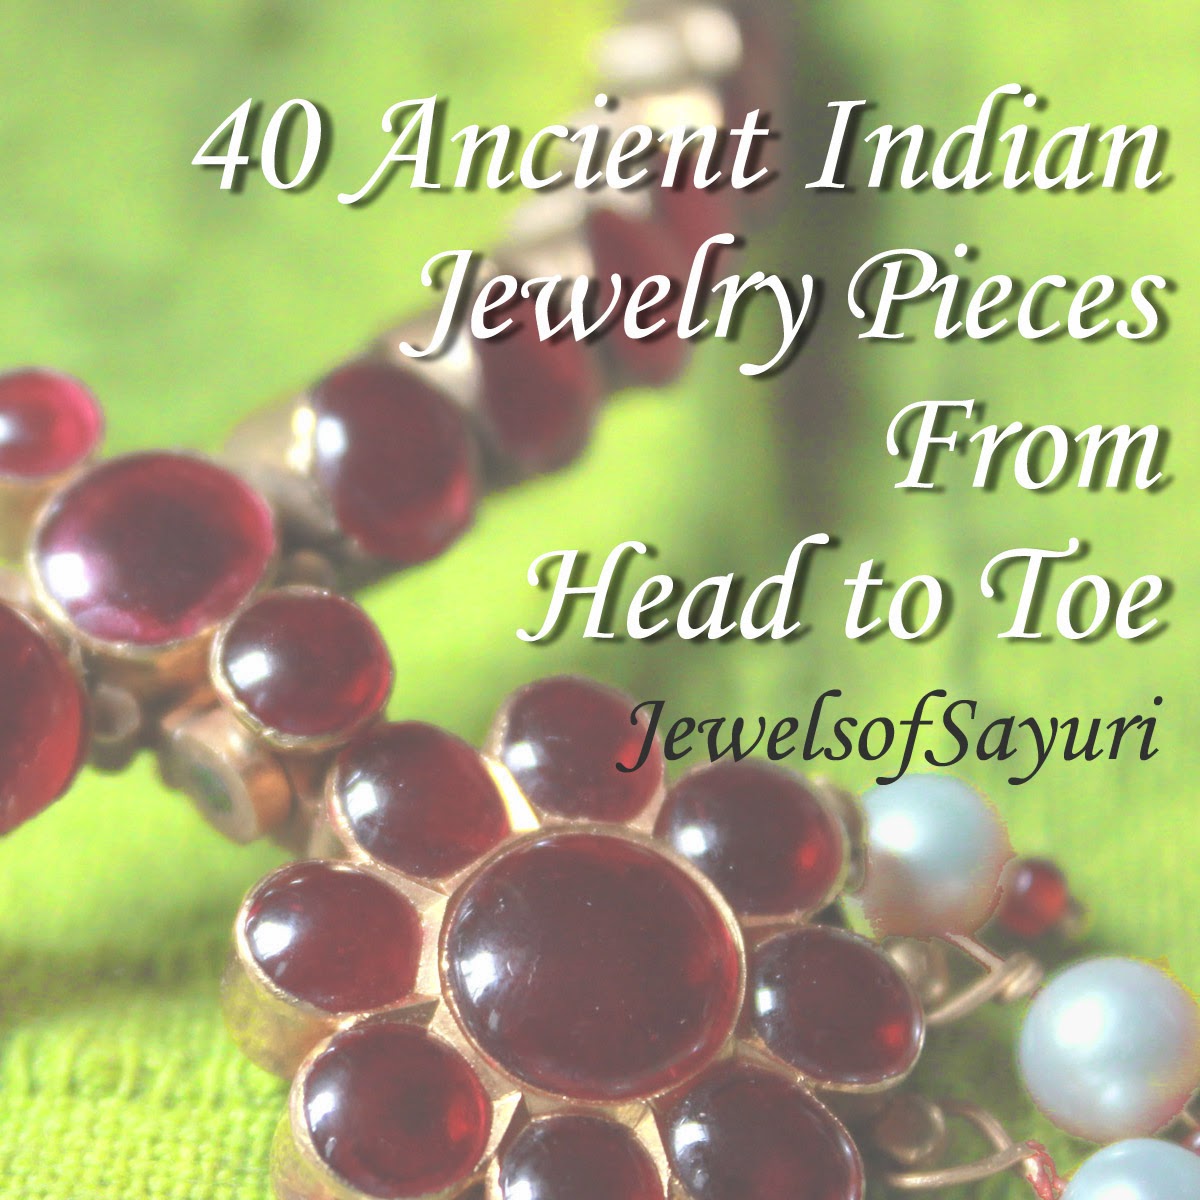 List of Ancient Indian Jewellery